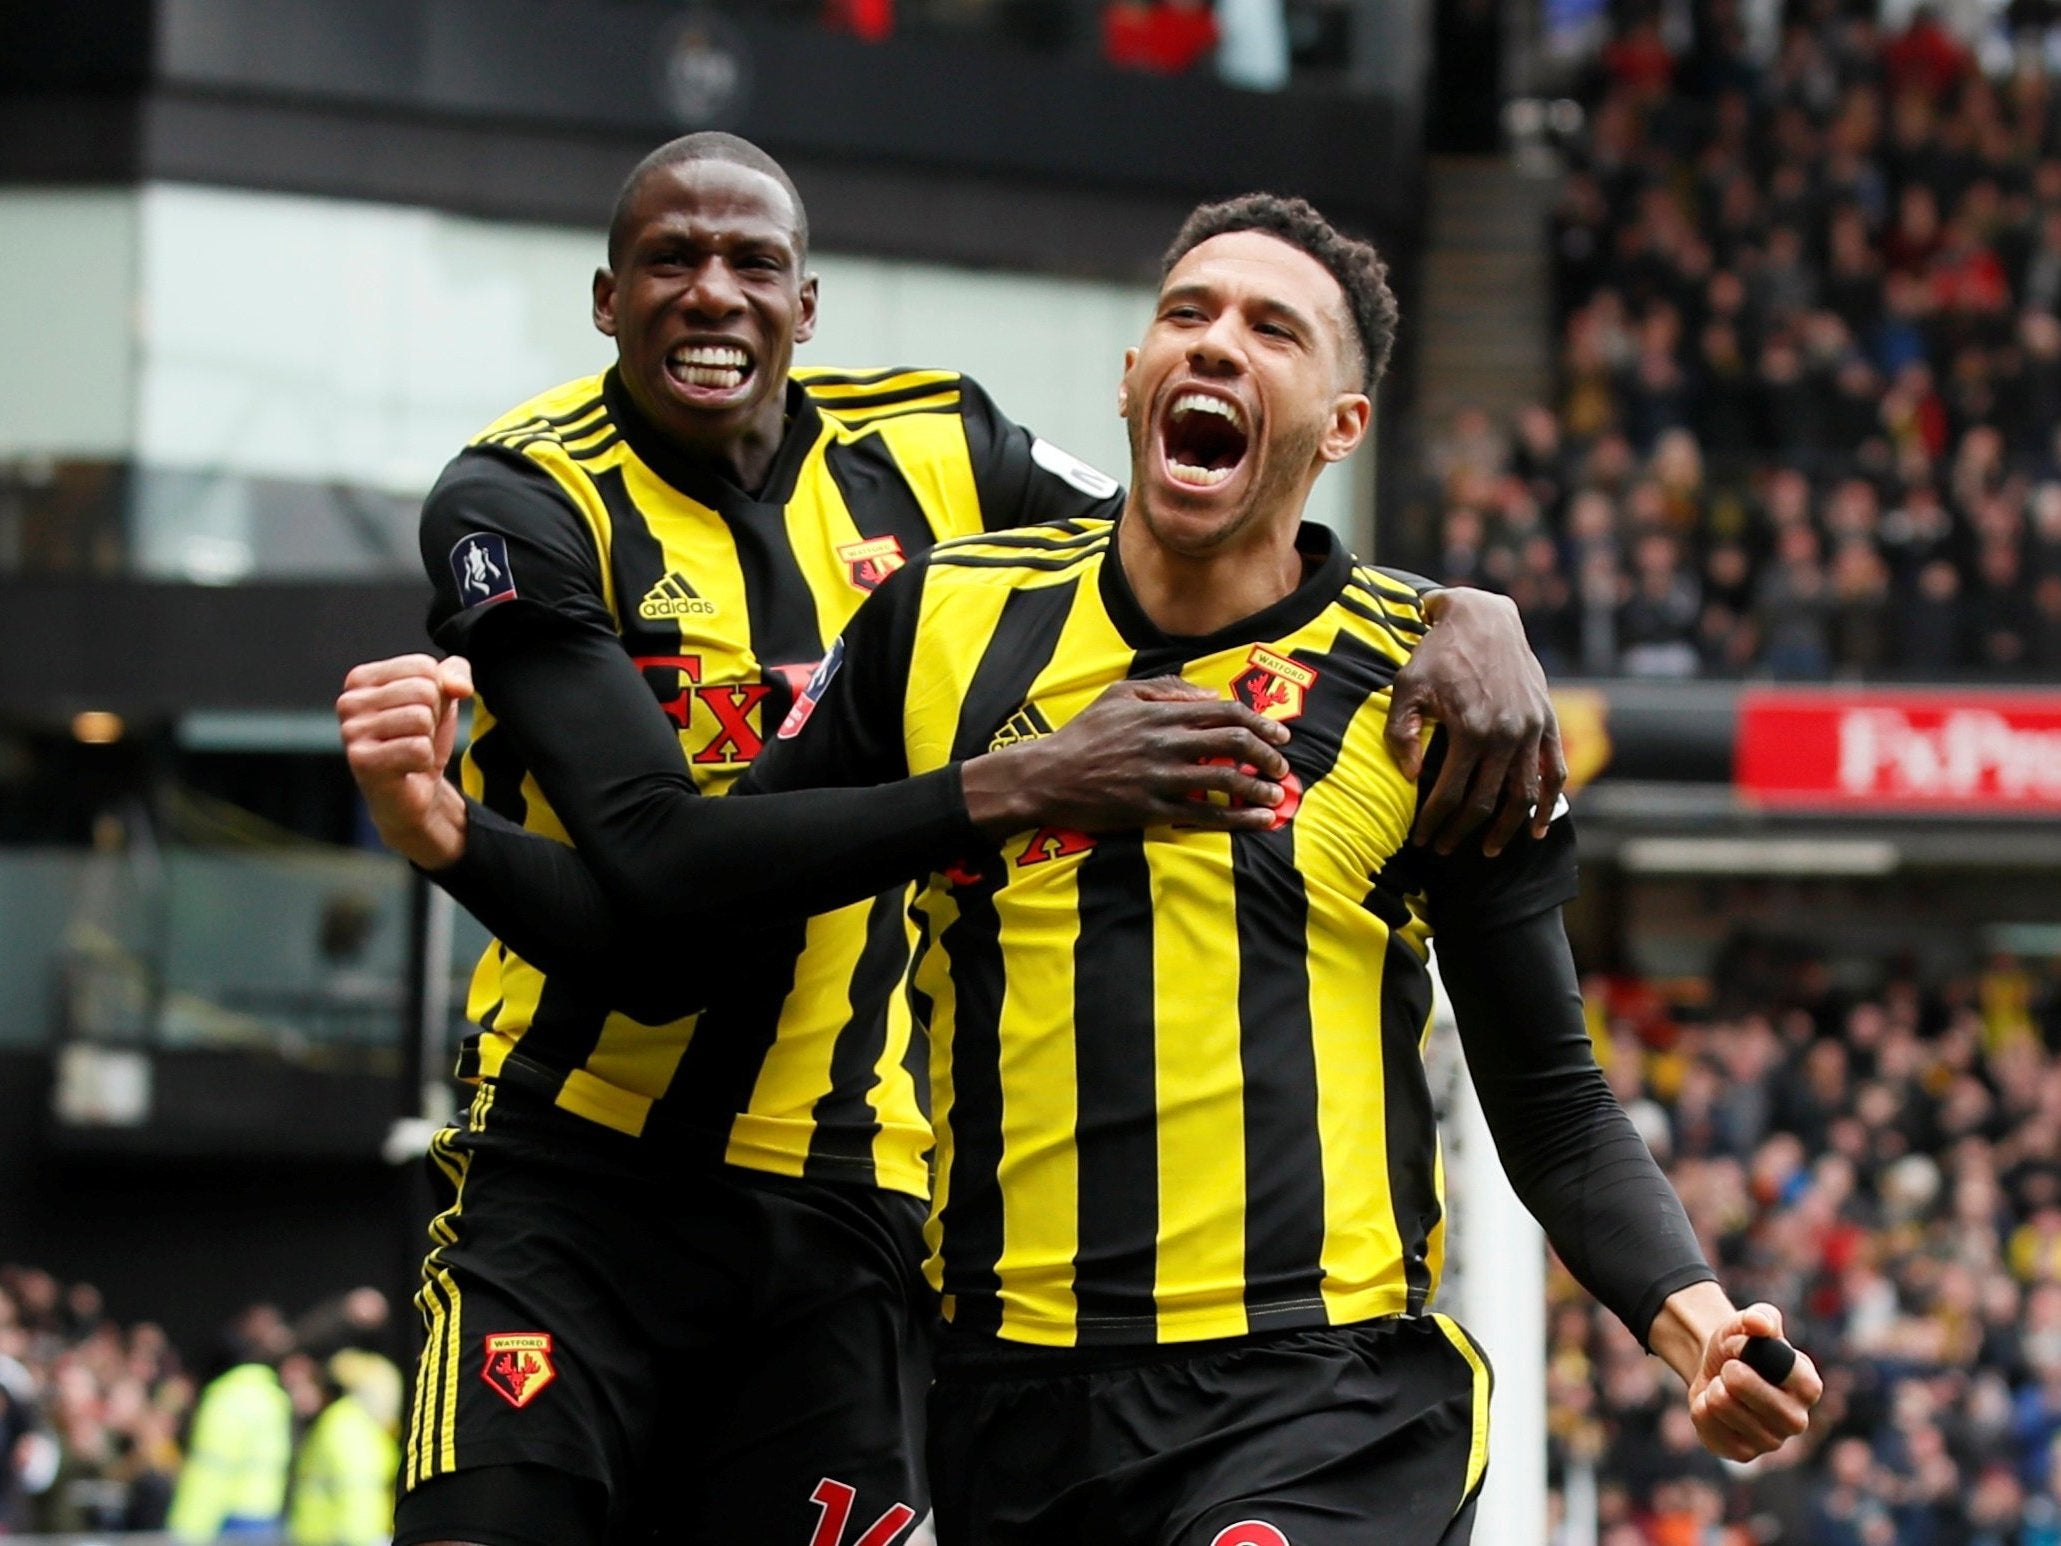 Capoue opened the scoring for the Hornets